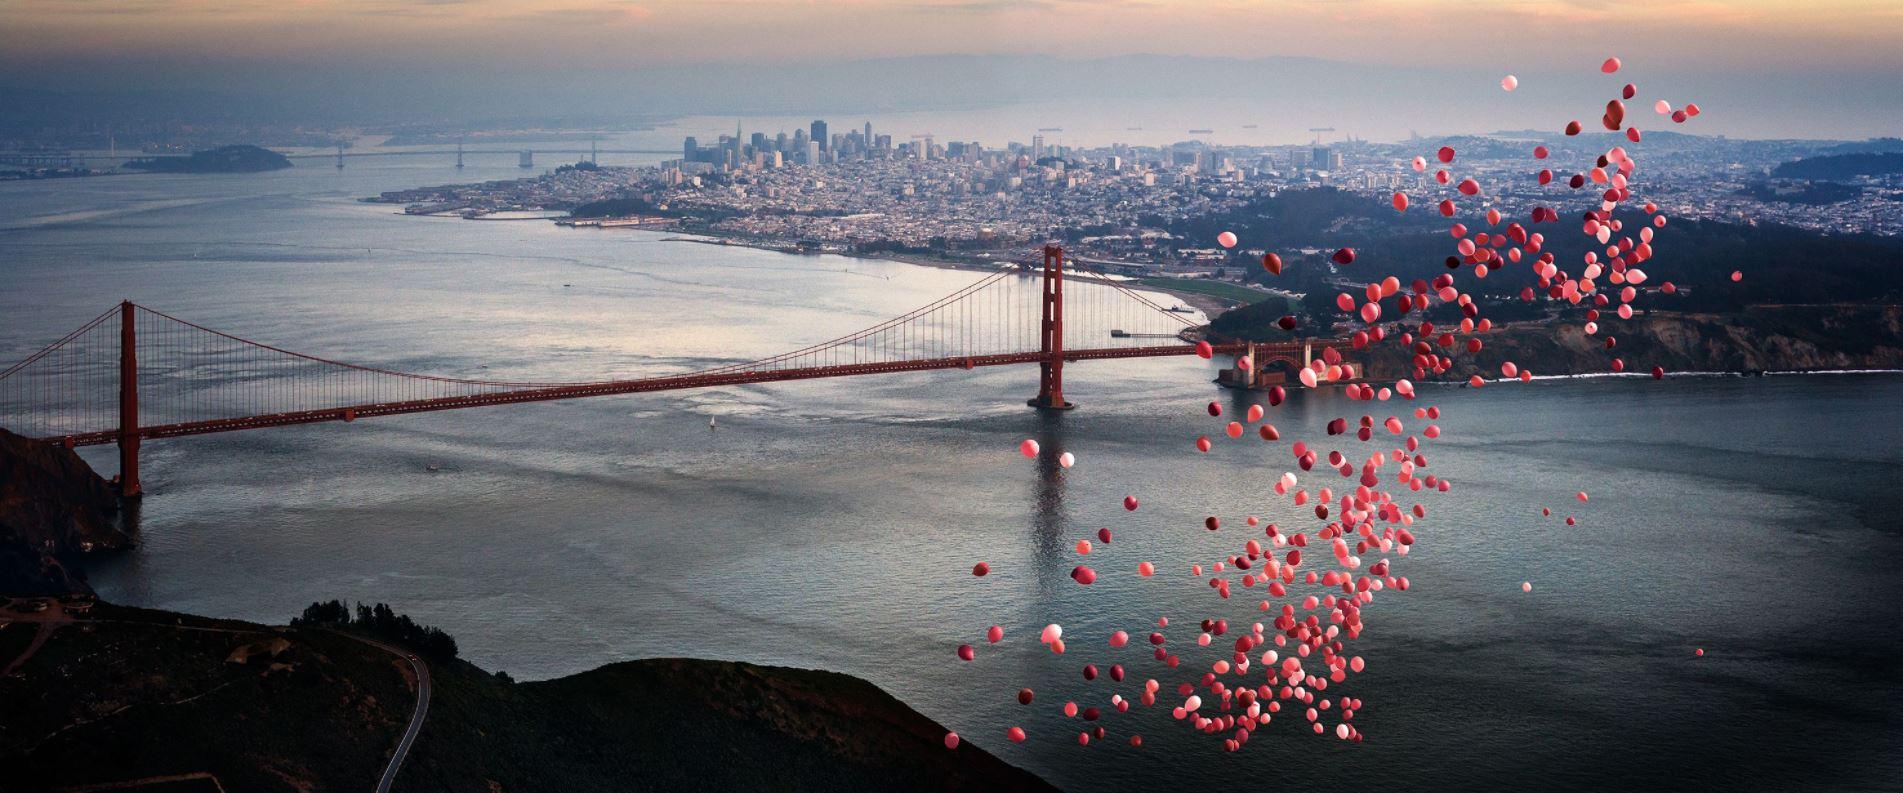 Ballons over San Francisco - city view over golden gate bridge with red ballons